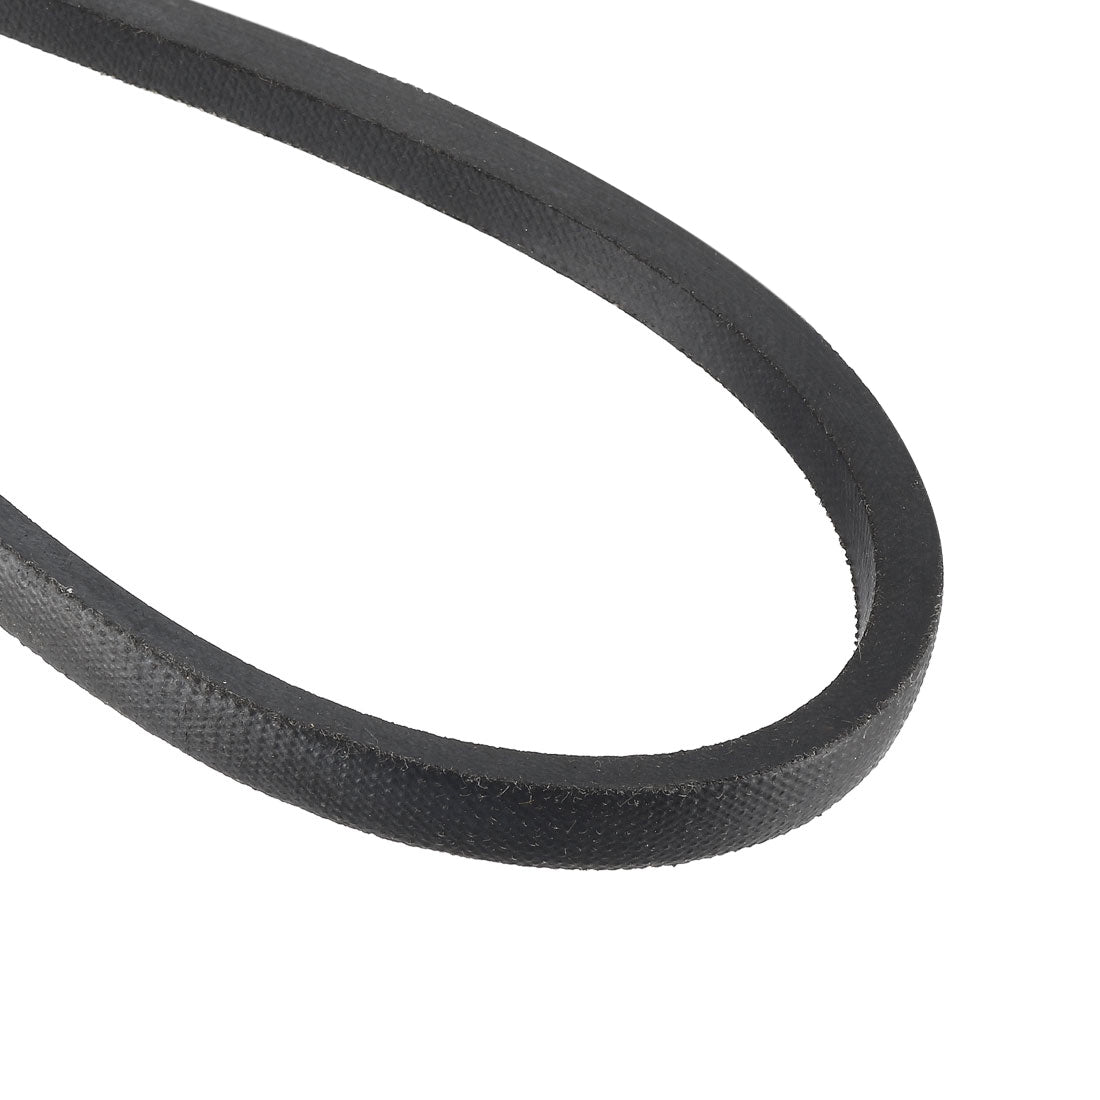 uxcell Uxcell A-1524/A60 Drive V-Belt Inner Girth 60-inch Industrial Rubber Transmission Belt